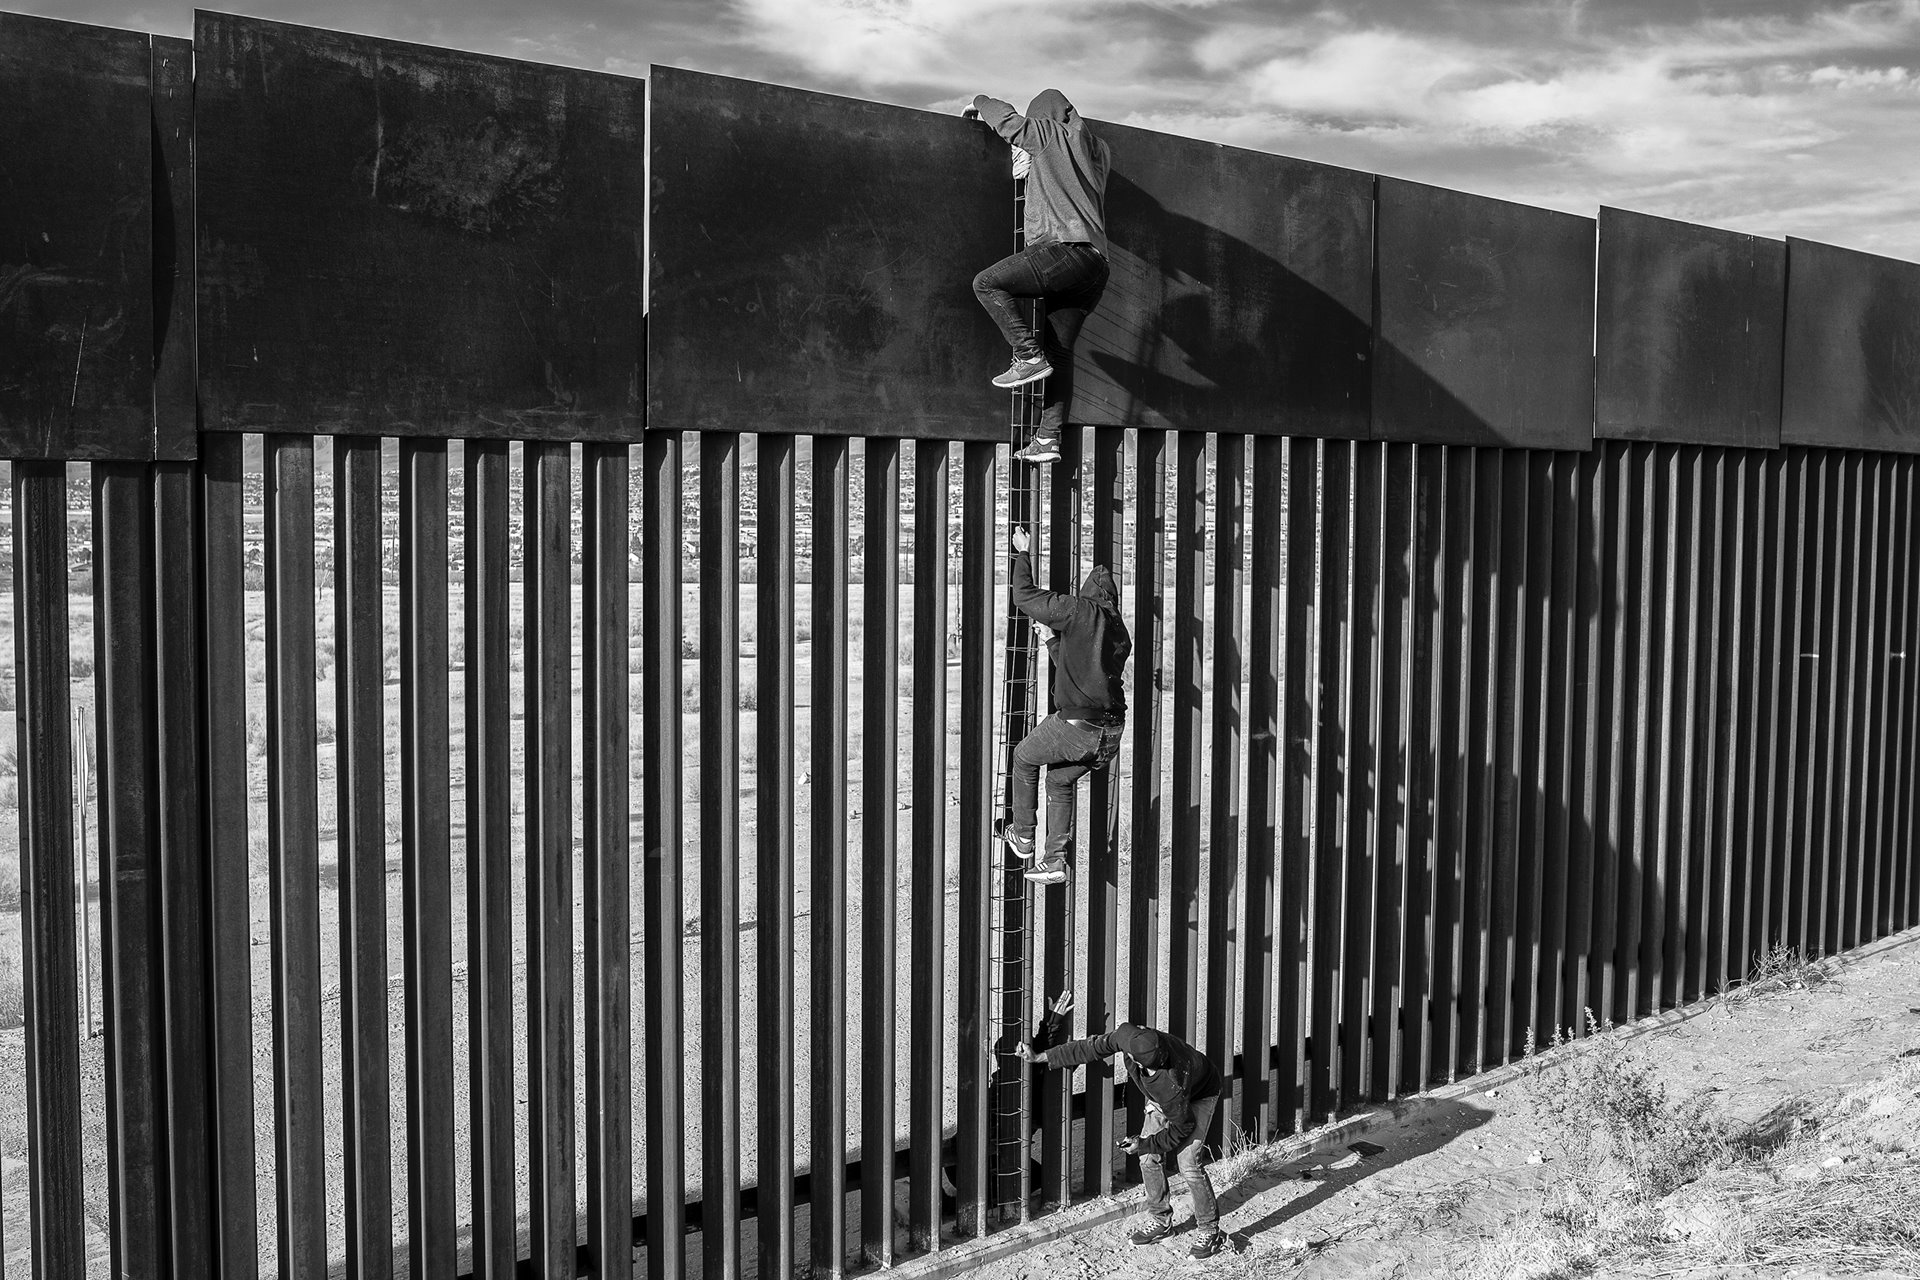 Migrants use a homemade ladder to climb a section of the border wall with the help of a smuggler, in Ciudad Juárez, Mexico.